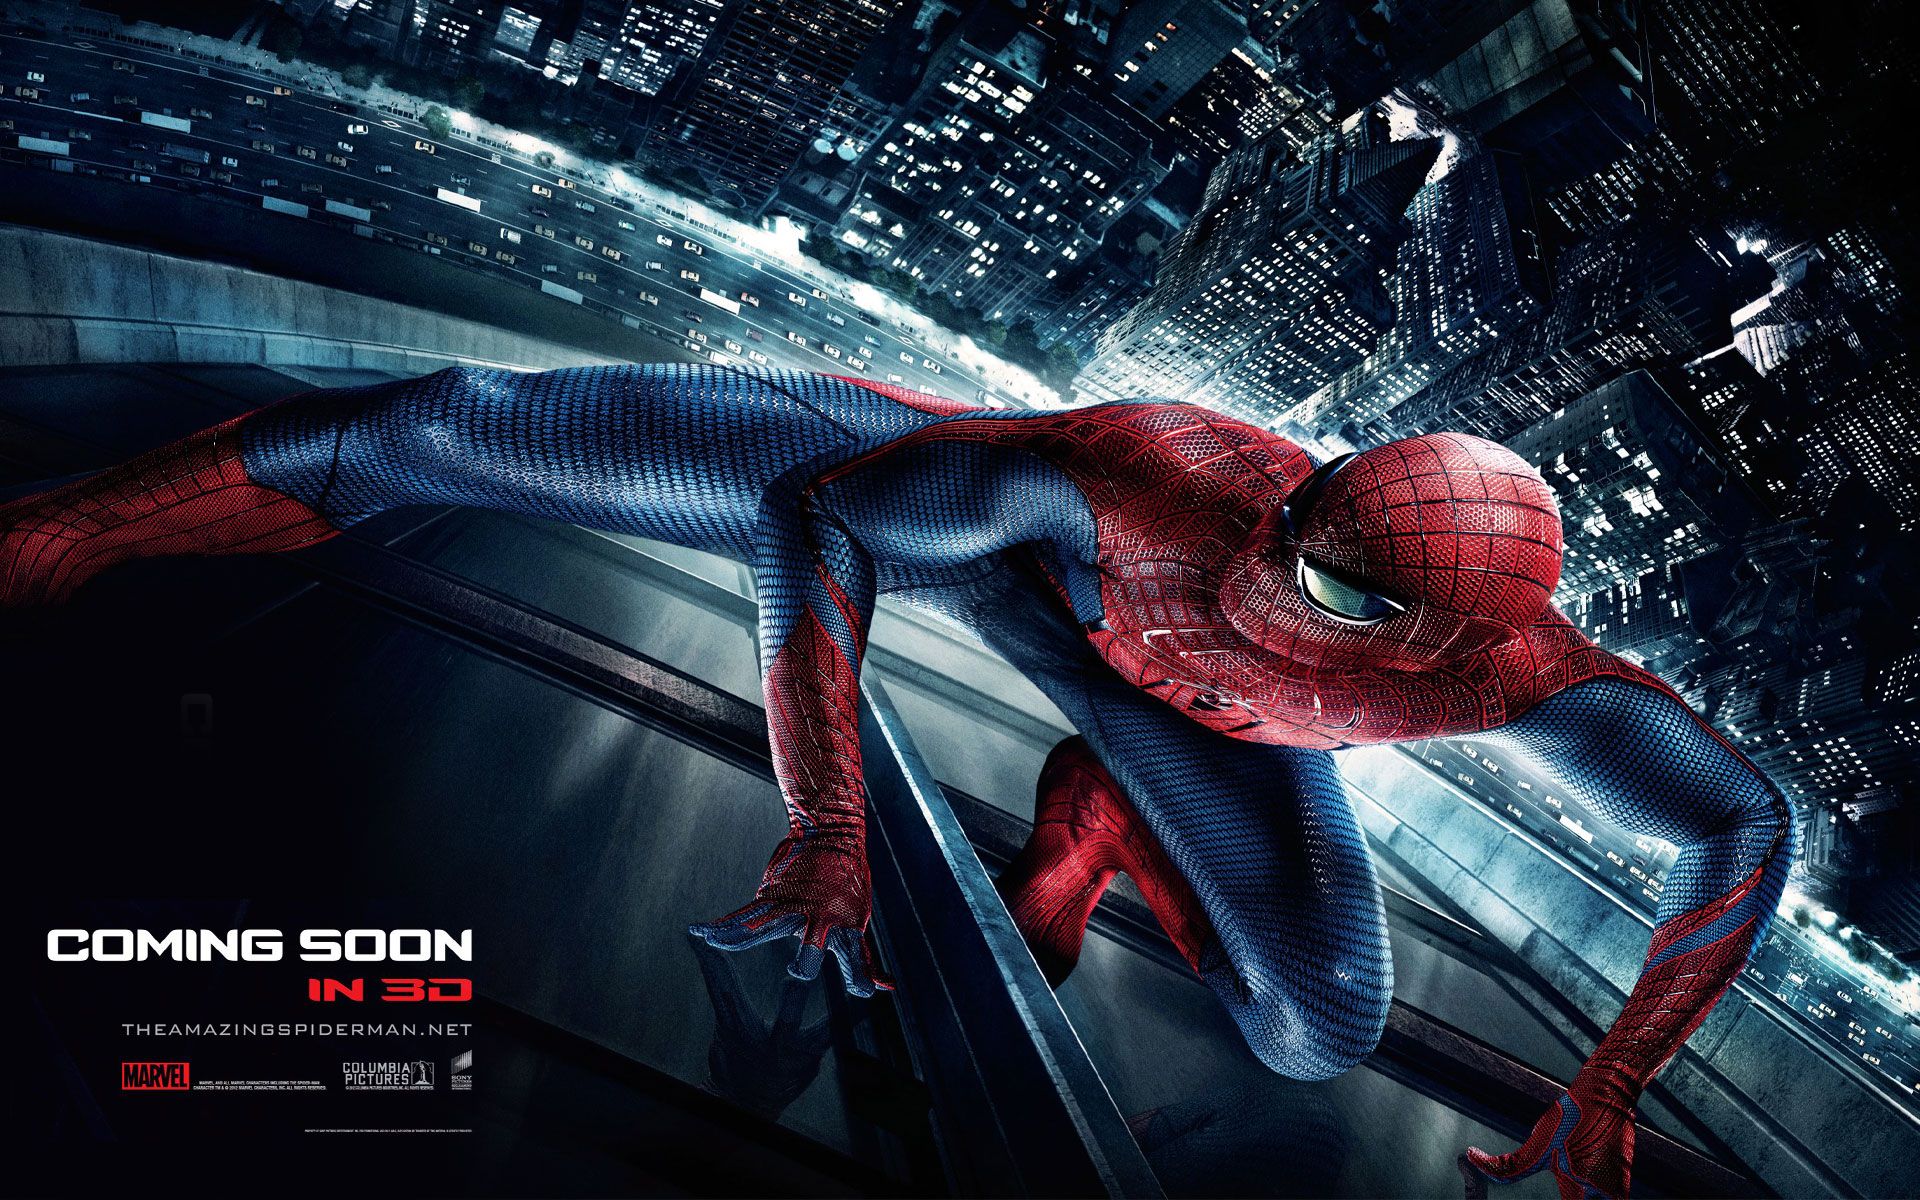 80 The Amazing Spider-Man HD Wallpapers | Backgrounds - Wallpaper ...